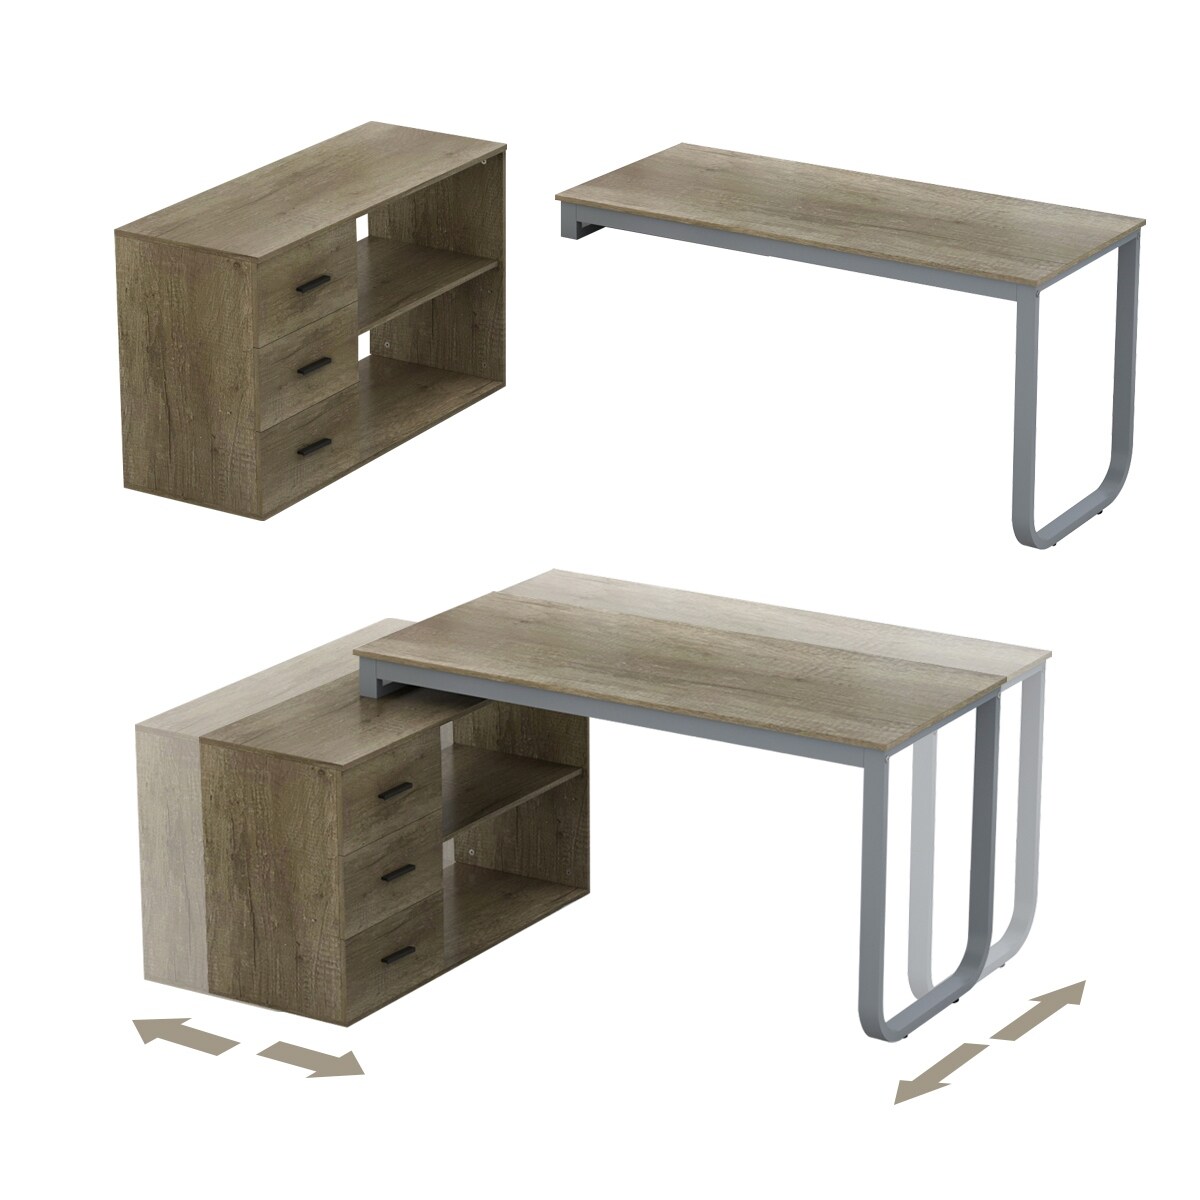 https://ak1.ostkcdn.com/images/products/is/images/direct/3c858557d1e454f6d4e36e31fefbc6077a365f0e/L-Shaped-Computer-Desk%2C-55.1%22W-Large-Executive-Office-Desk.jpg